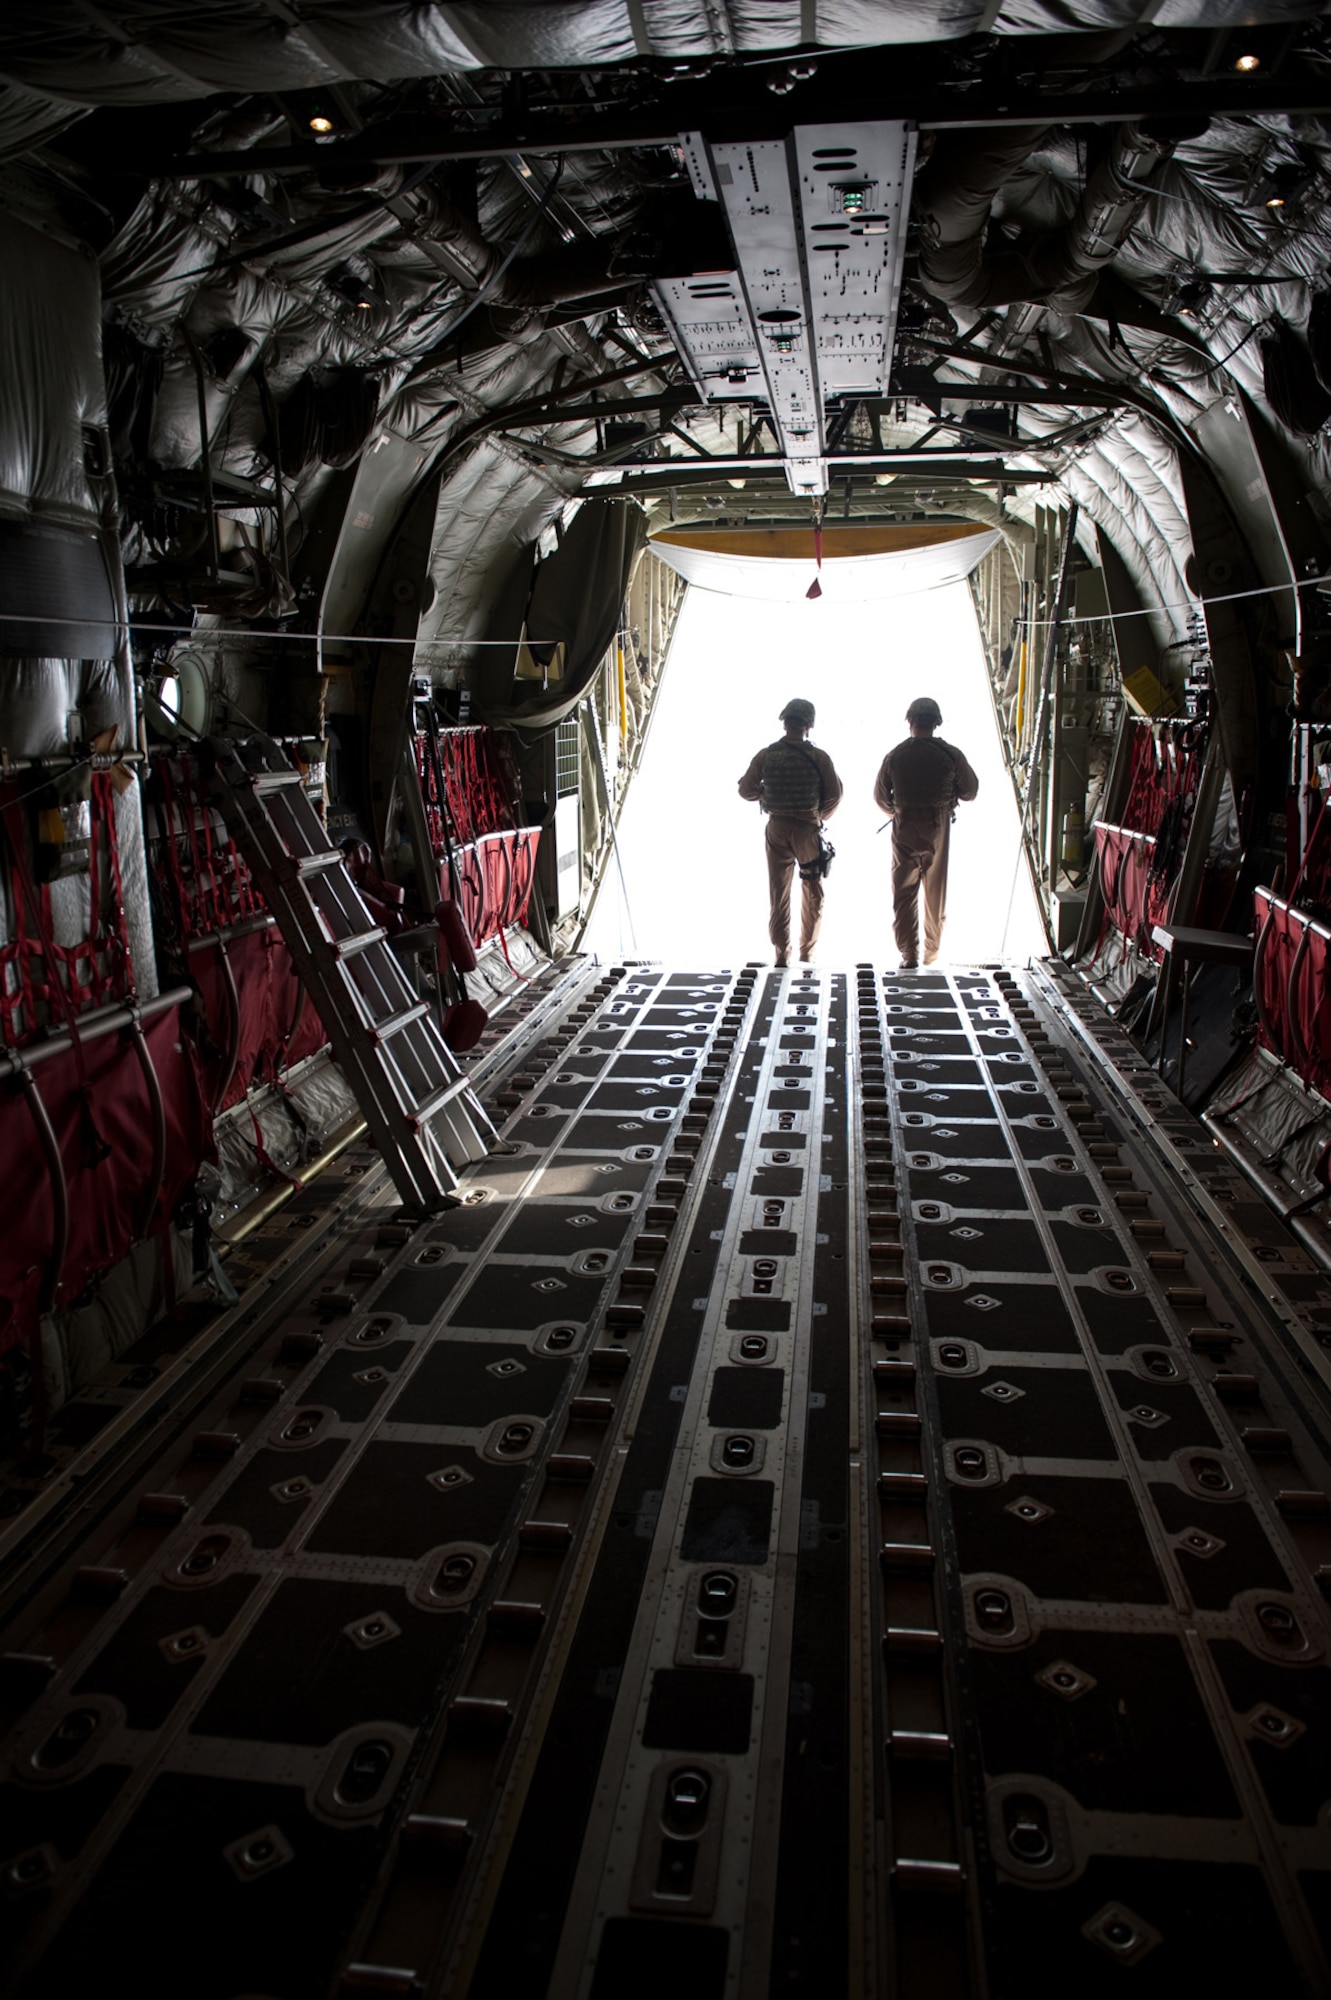 Right, Airman 1st Class Dustin Wiley and Senior Airman Brandon Owens, 379th Expeditionary Security Forces Squadron Fly Away Security Team members, exit a C-130 as they prepare to secure the area around the aircraft, Oct. 6, in Southwest Asia. Airmen Wiley and Owens ensure U.S. Air Force aircraft are secure when they travel to areas with less established security. Airman Wiley is deployed from RAF Mildenhall, England, and Airman Owens is from Bolling Air Force Base, Washington D.C. Both are deployed in support of Operations Iraqi and Enduring Freedom. (U.S. Air Force photo/Staff Sgt. Robert Barney)